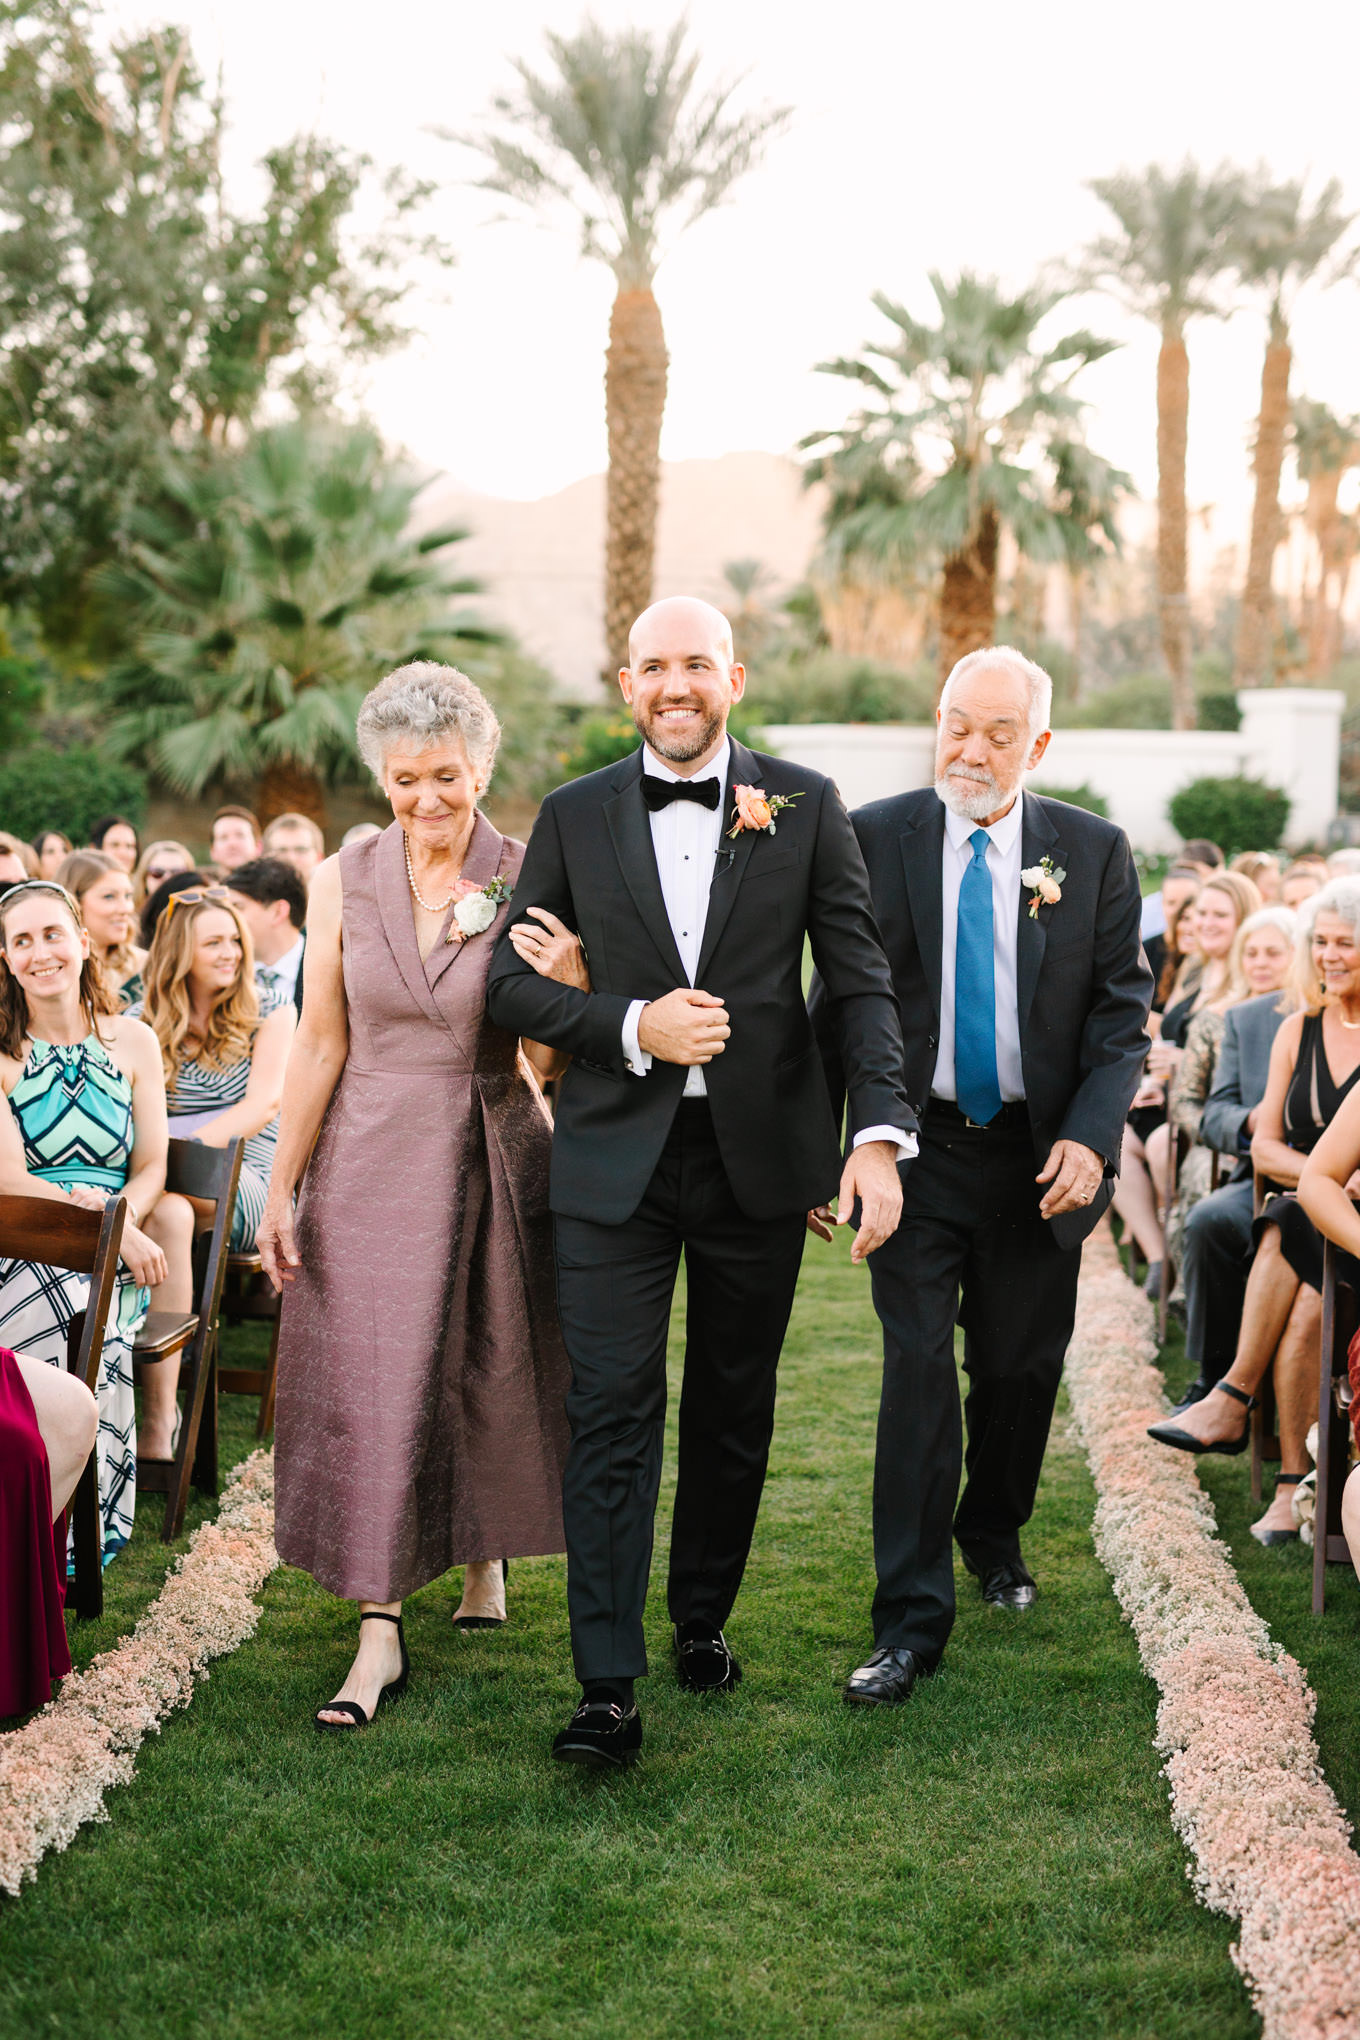 Seating of wedding guests | Pink Bougainvillea Estate wedding | Colorful LA wedding photography | #bougainvilleaestate #palmspringswedding #palmspringsweddingvenue #palmspringsphotographer Source: Mary Costa Photography | Los Angeles